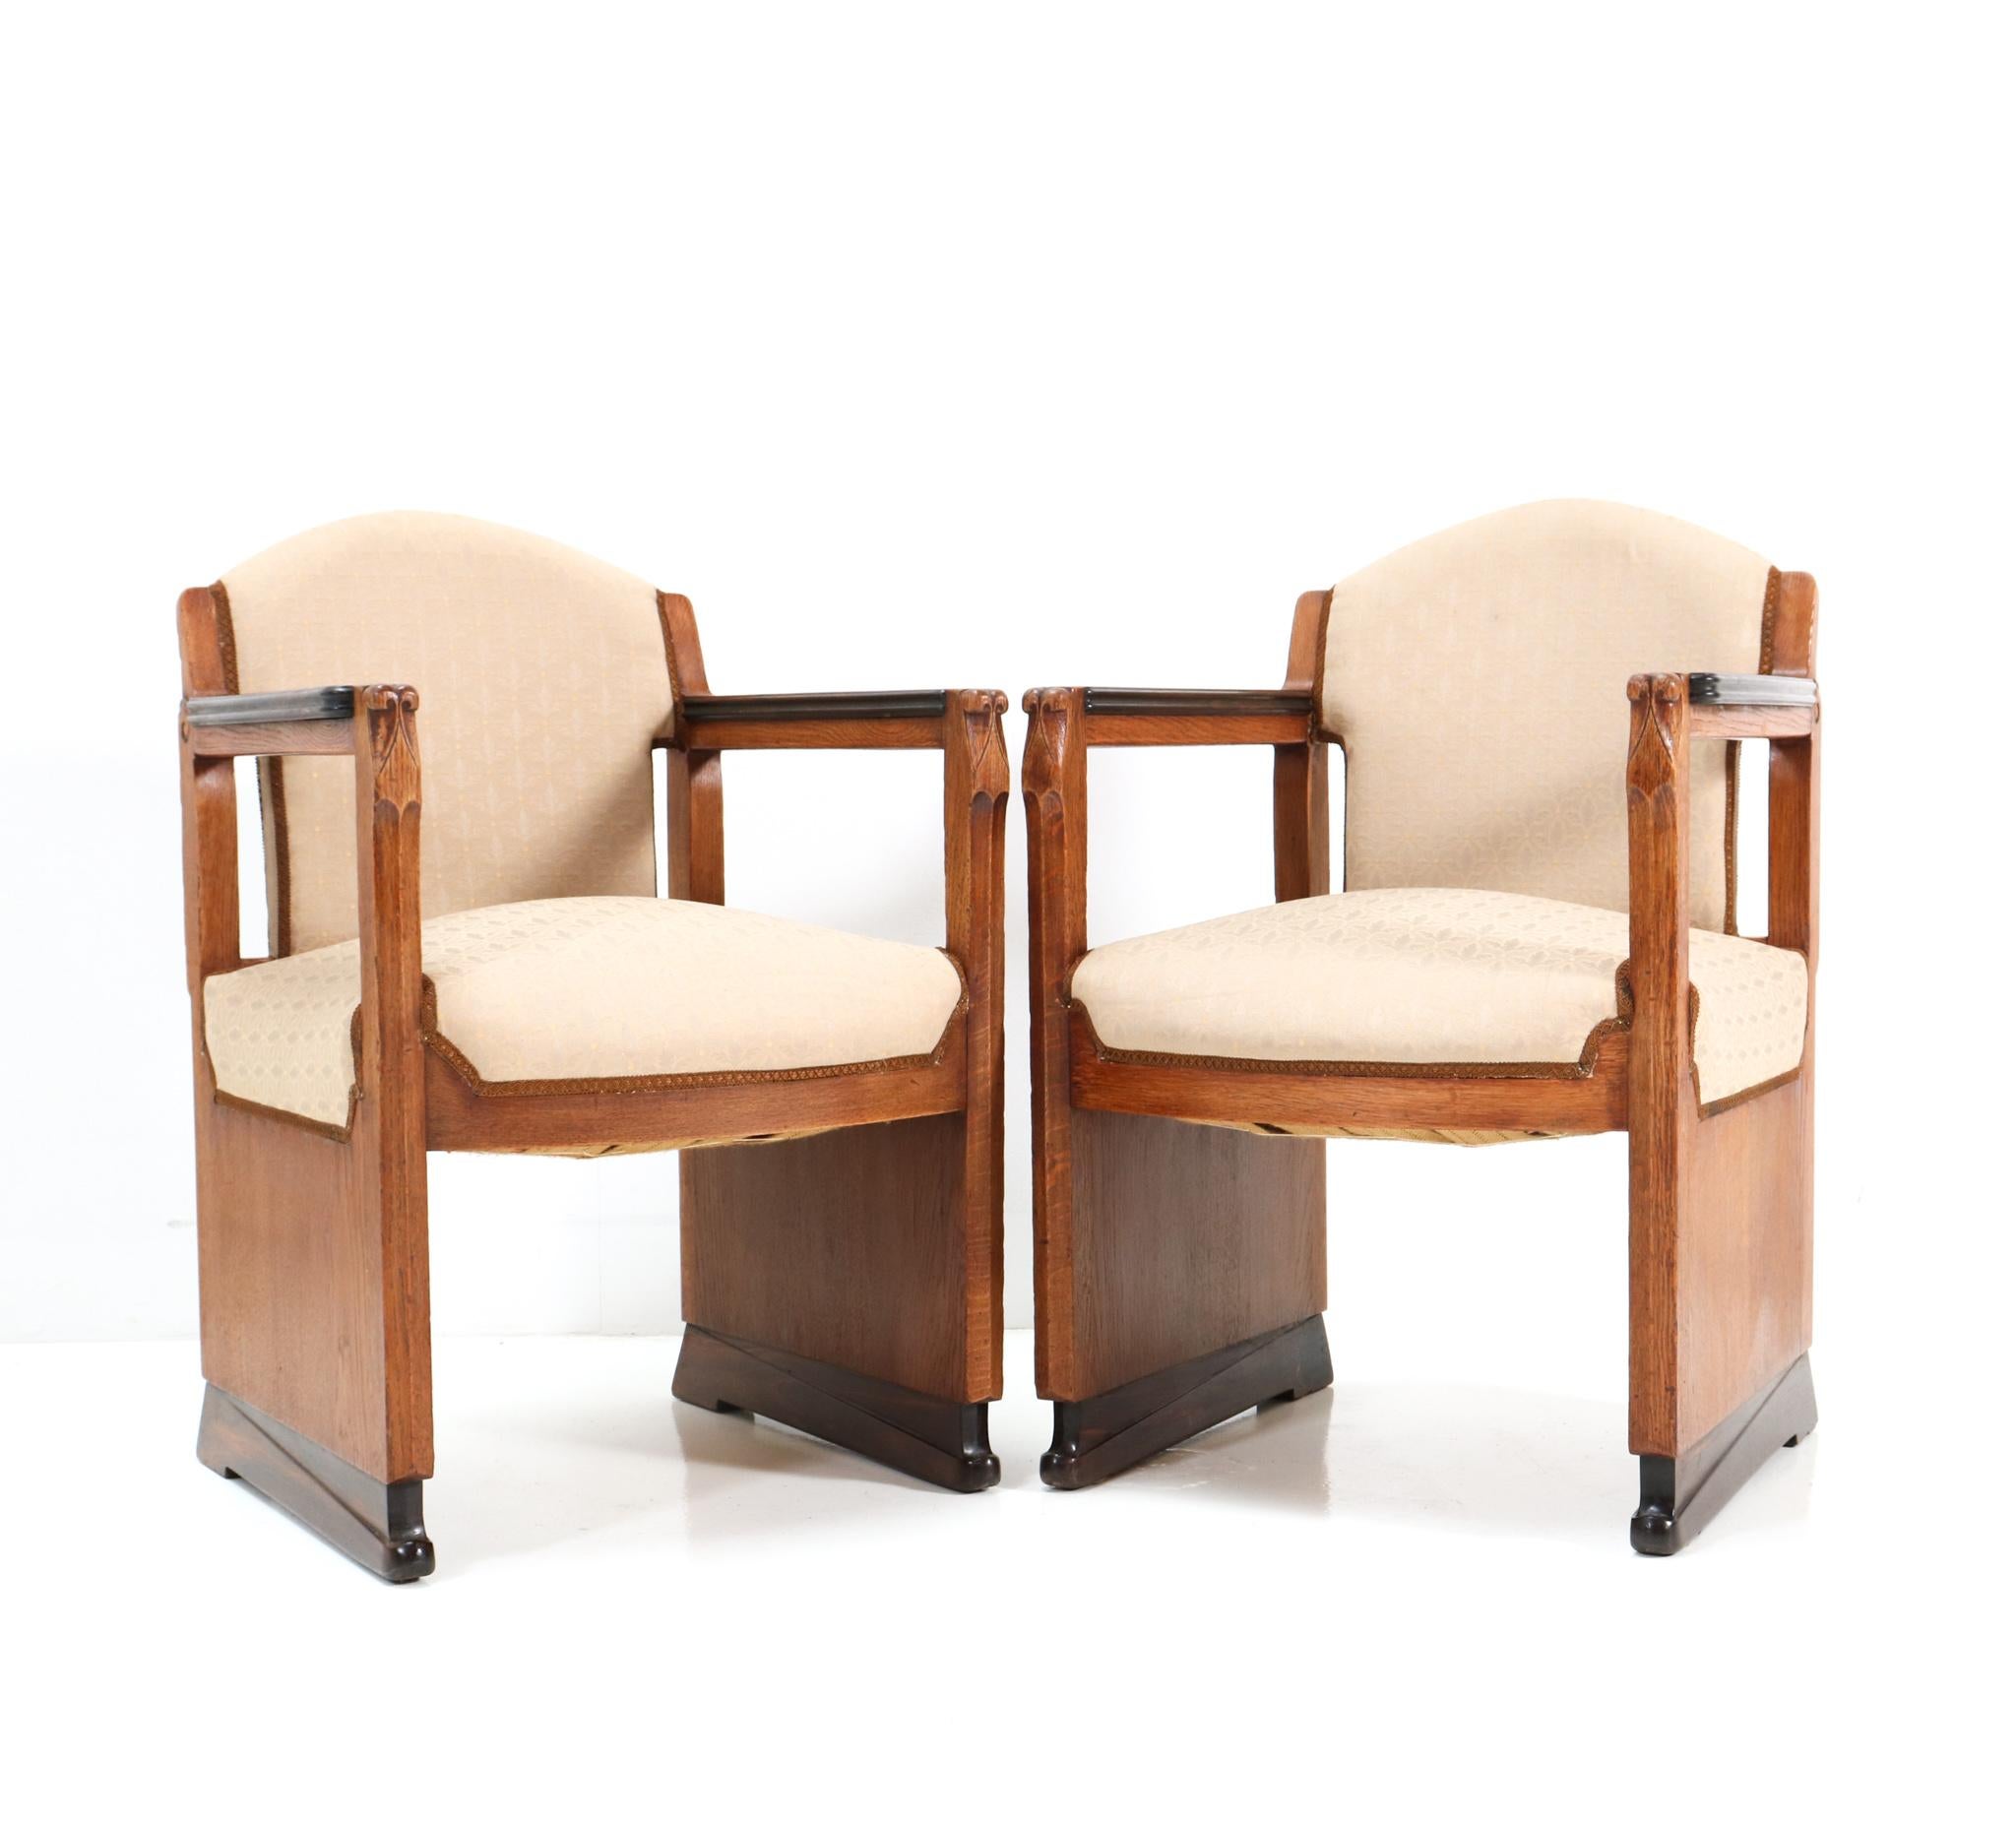 Magnificent and rare pair of Art Deco Amsterdamse School armchairs.
The design is attributed to Hildo Krop for 't Woonhuys Amsterdam.
Striking Dutch design from the 1920s.
Solid oak and original oak veneer base with solid macassar ebony